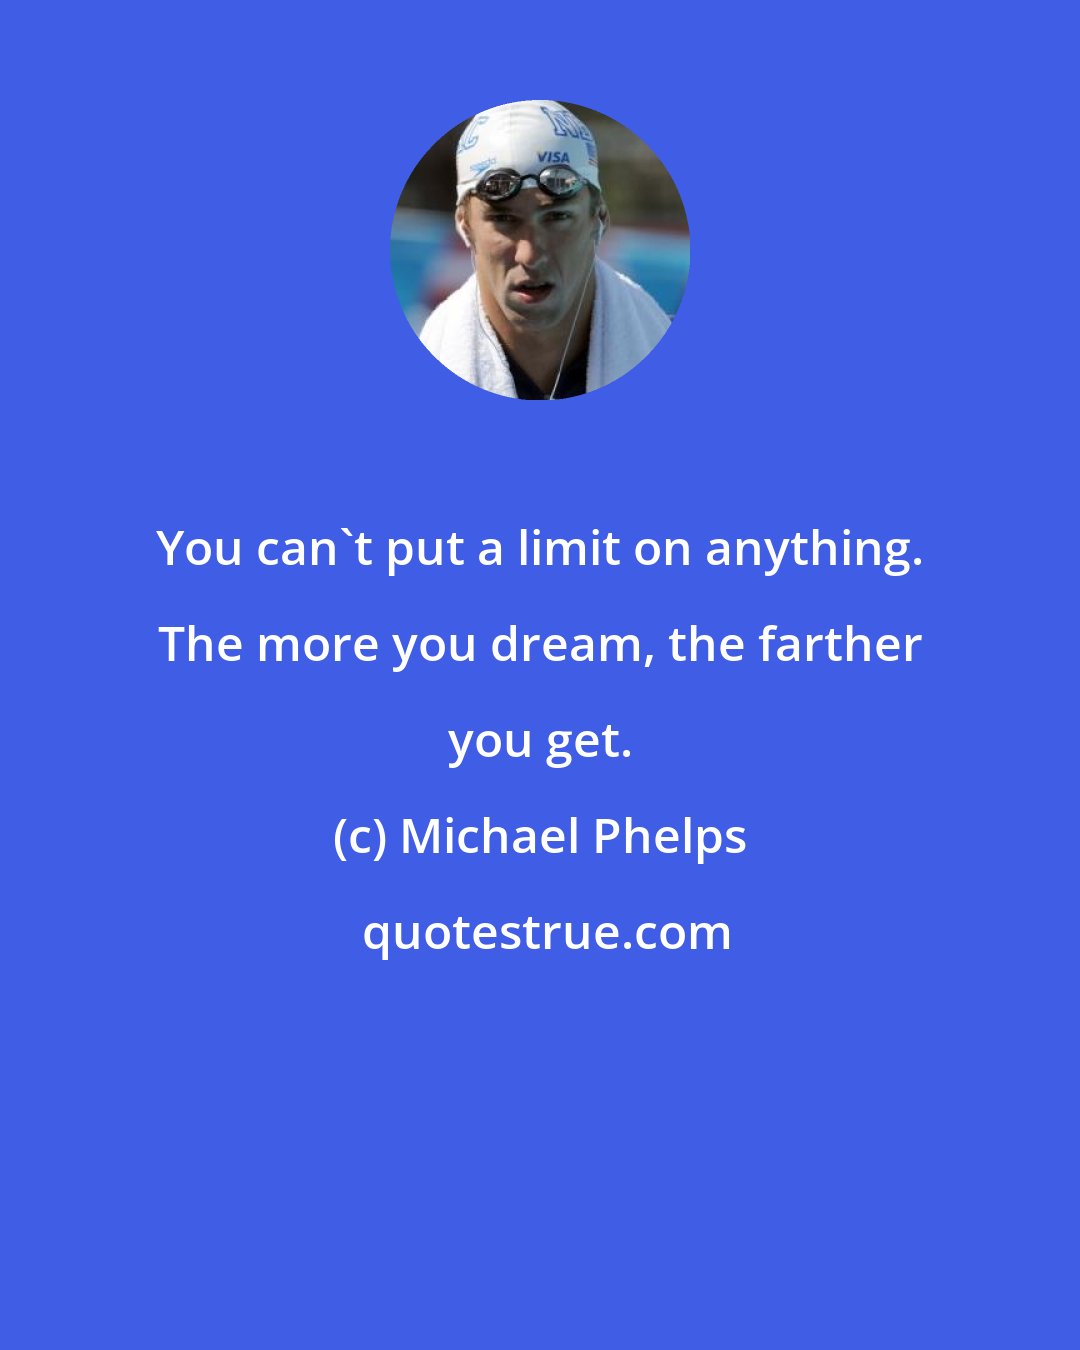 Michael Phelps: You can't put a limit on anything. The more you dream, the farther you get.